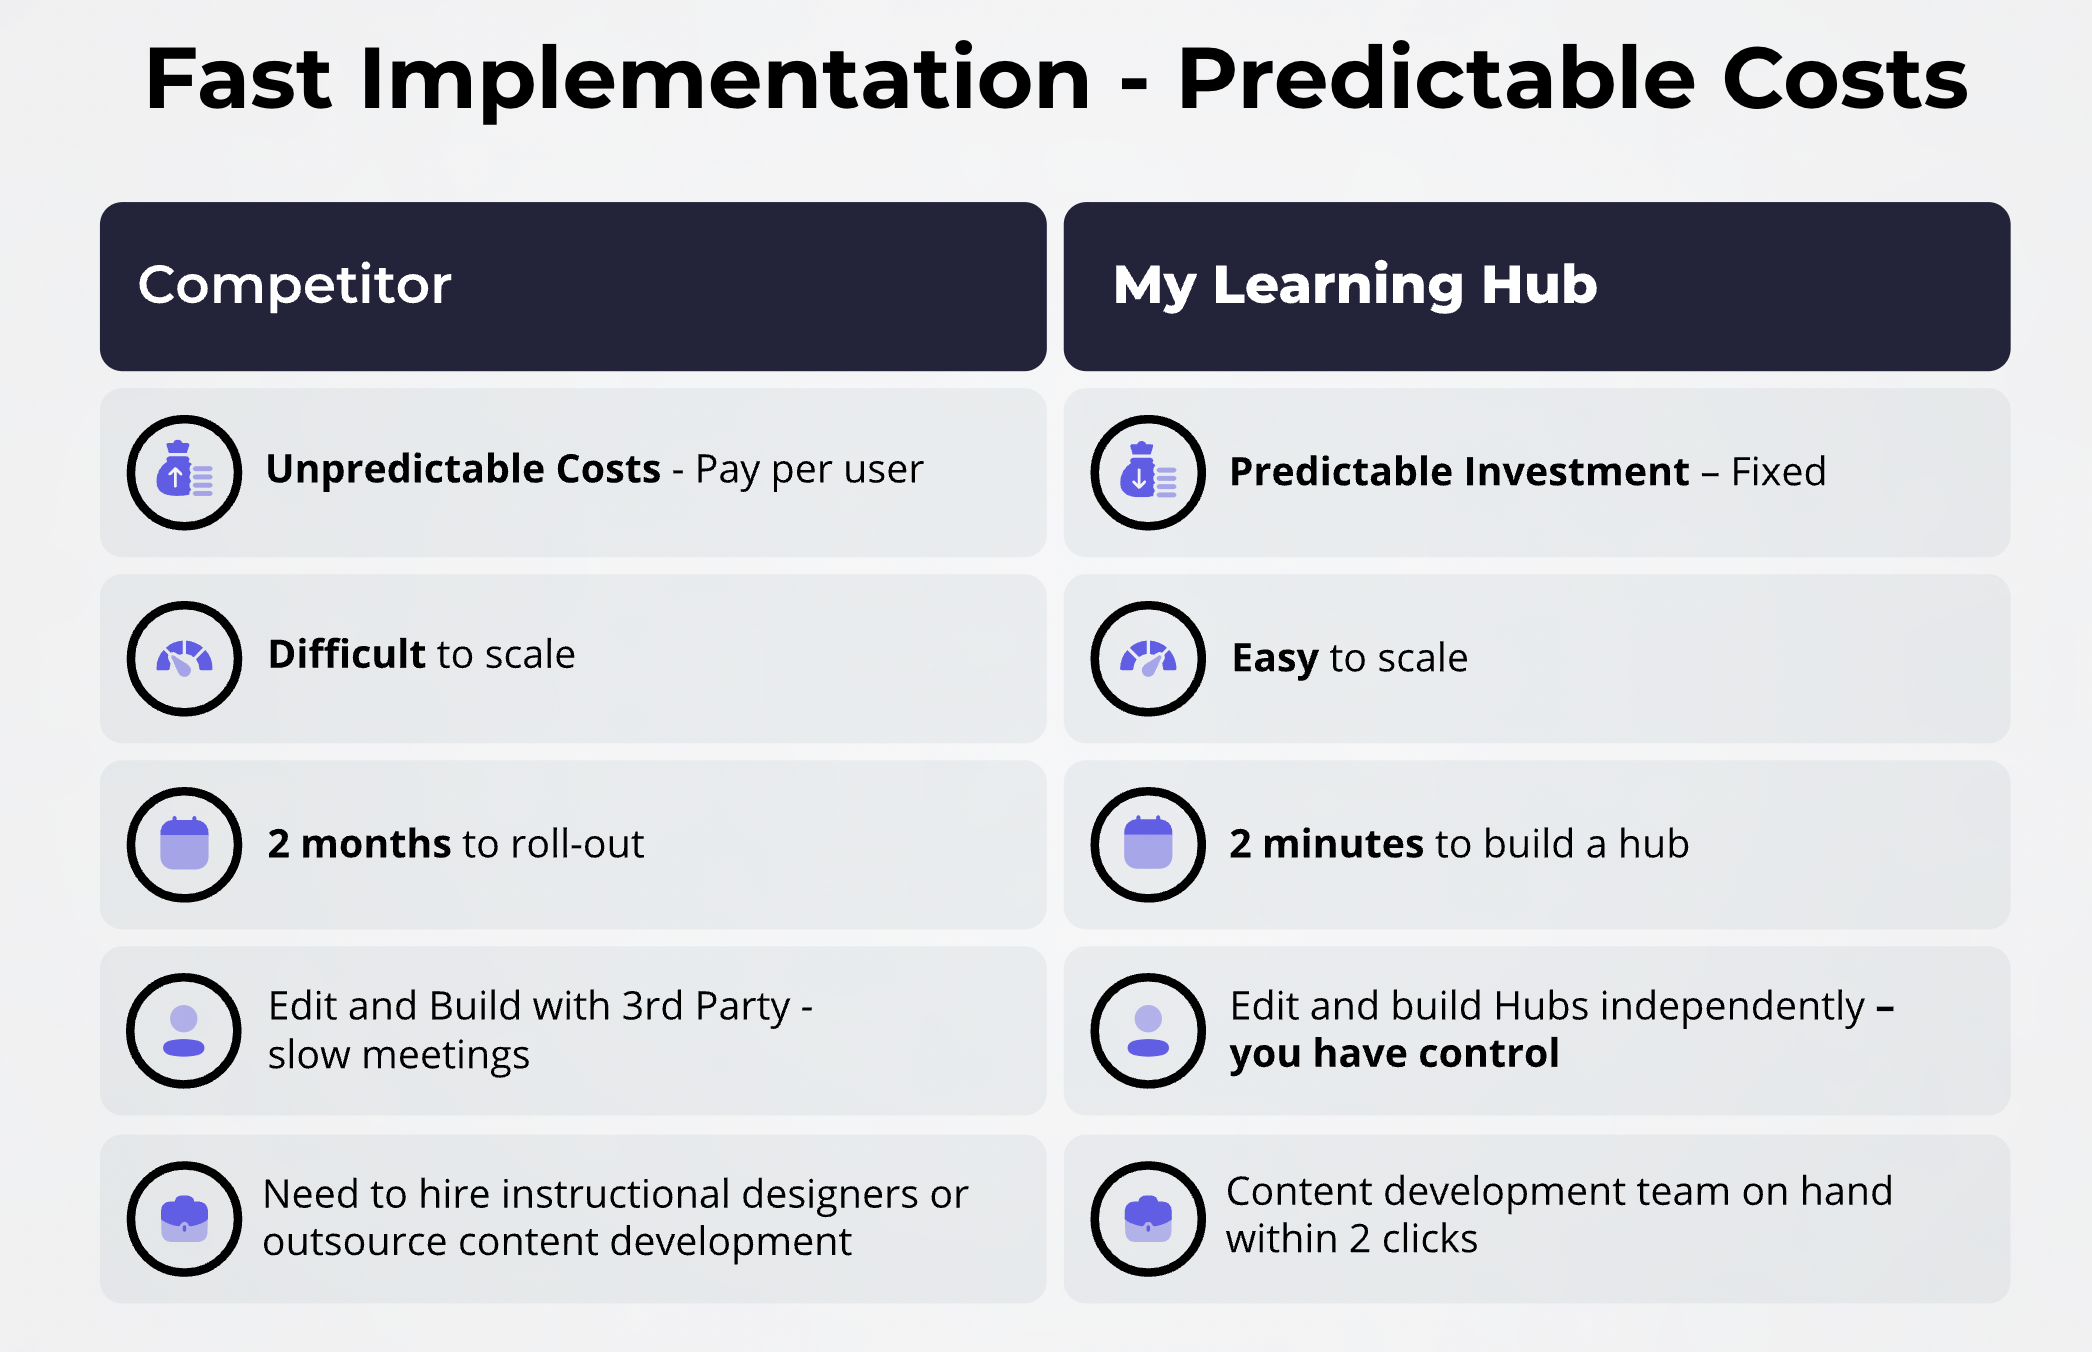 My Learning Hub Software - Fast Implementation - Predictable Costs